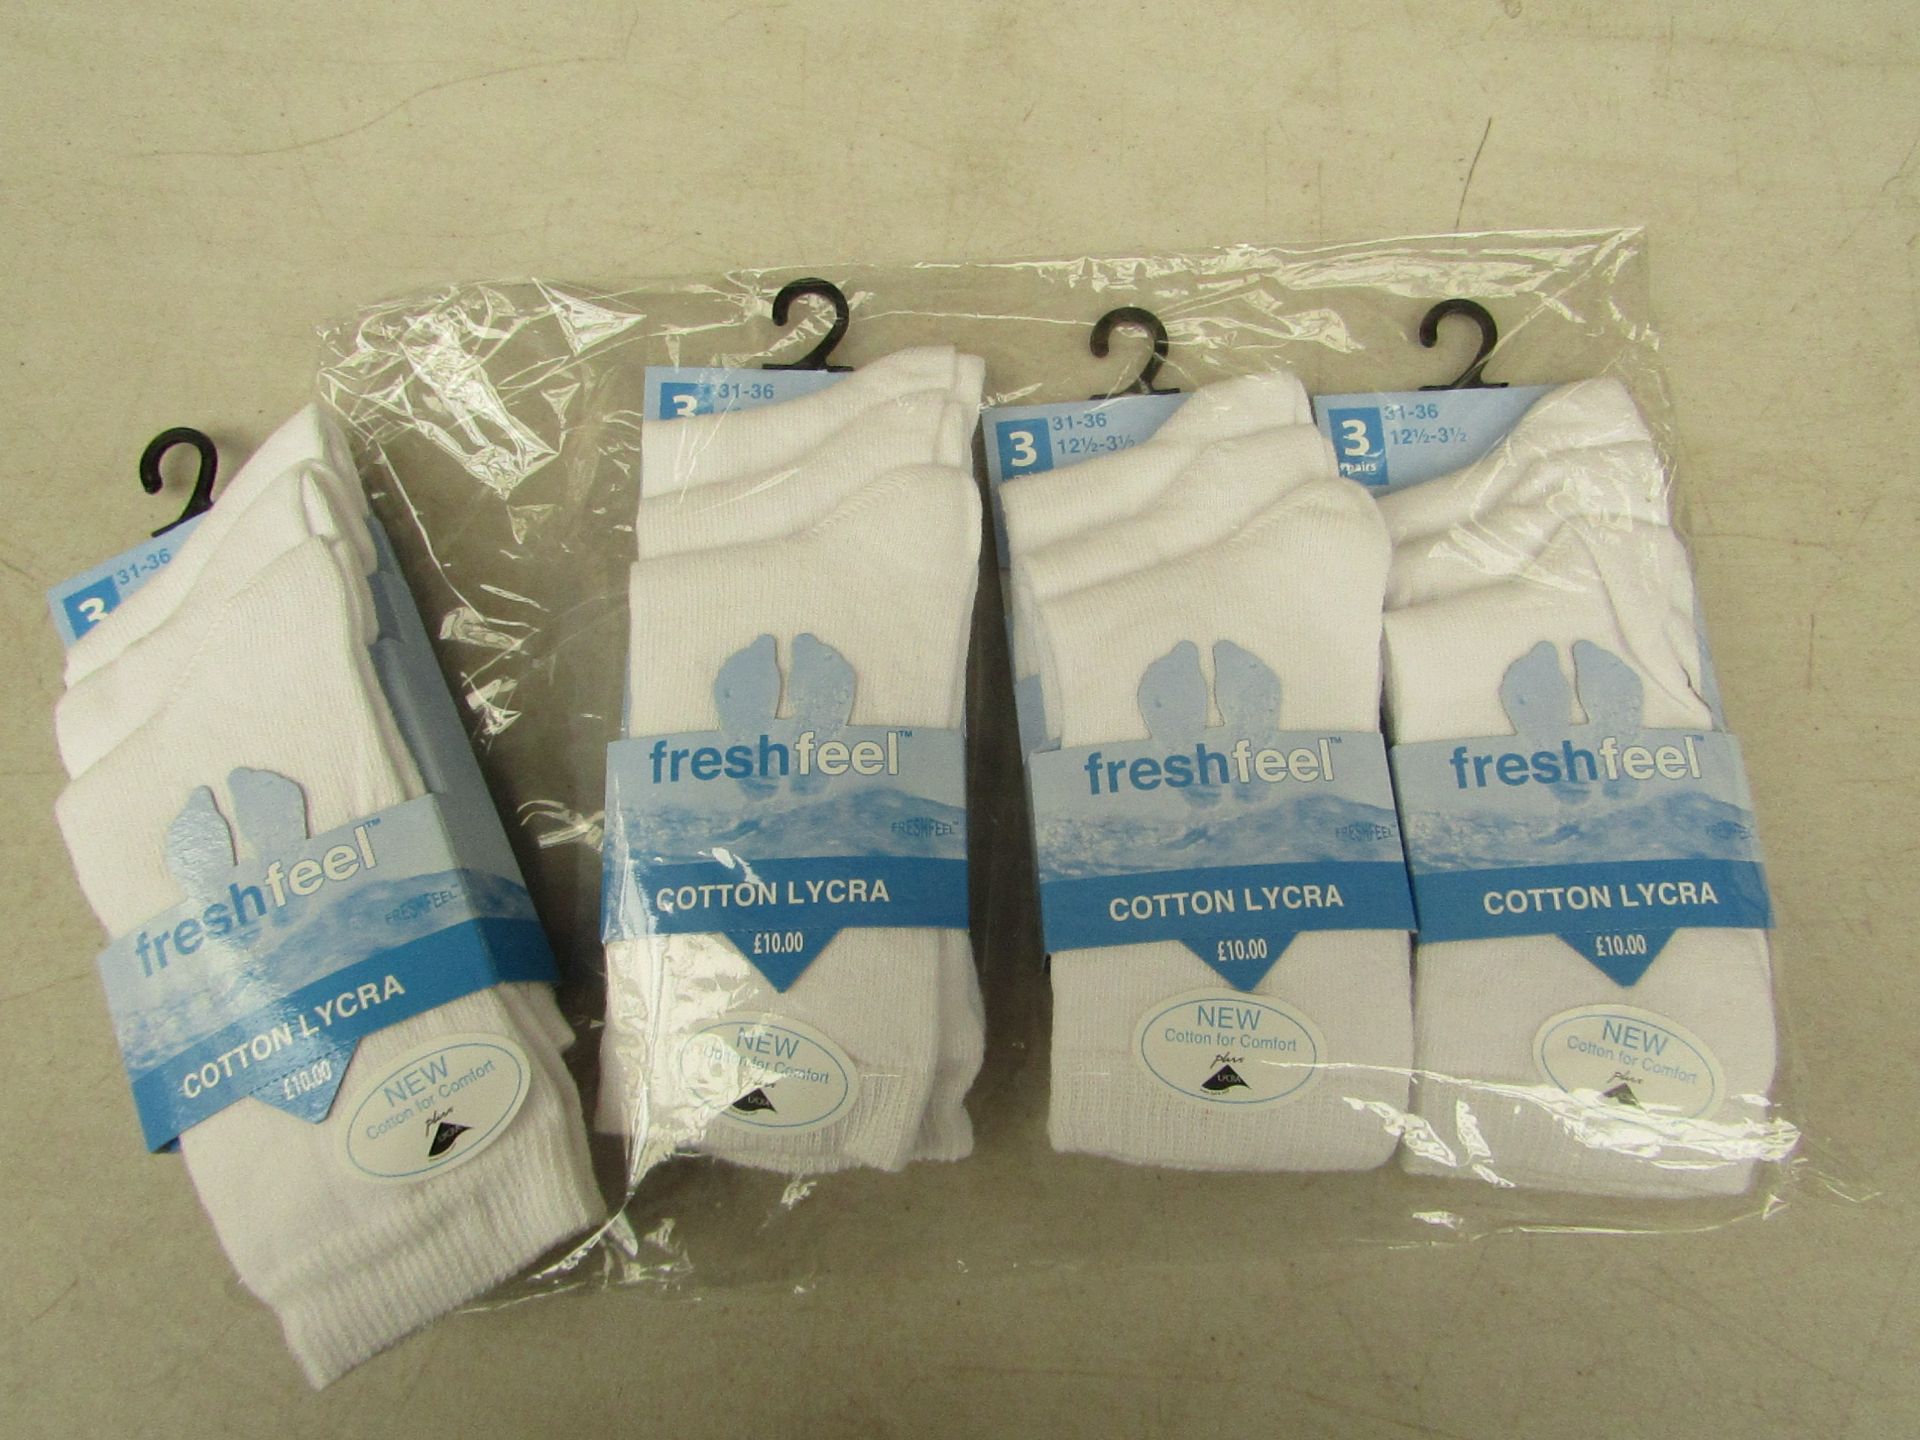 4 PKS of 3 white Cotton Lycra socks,size 12-1/2 to 3-1/2, new in packaging